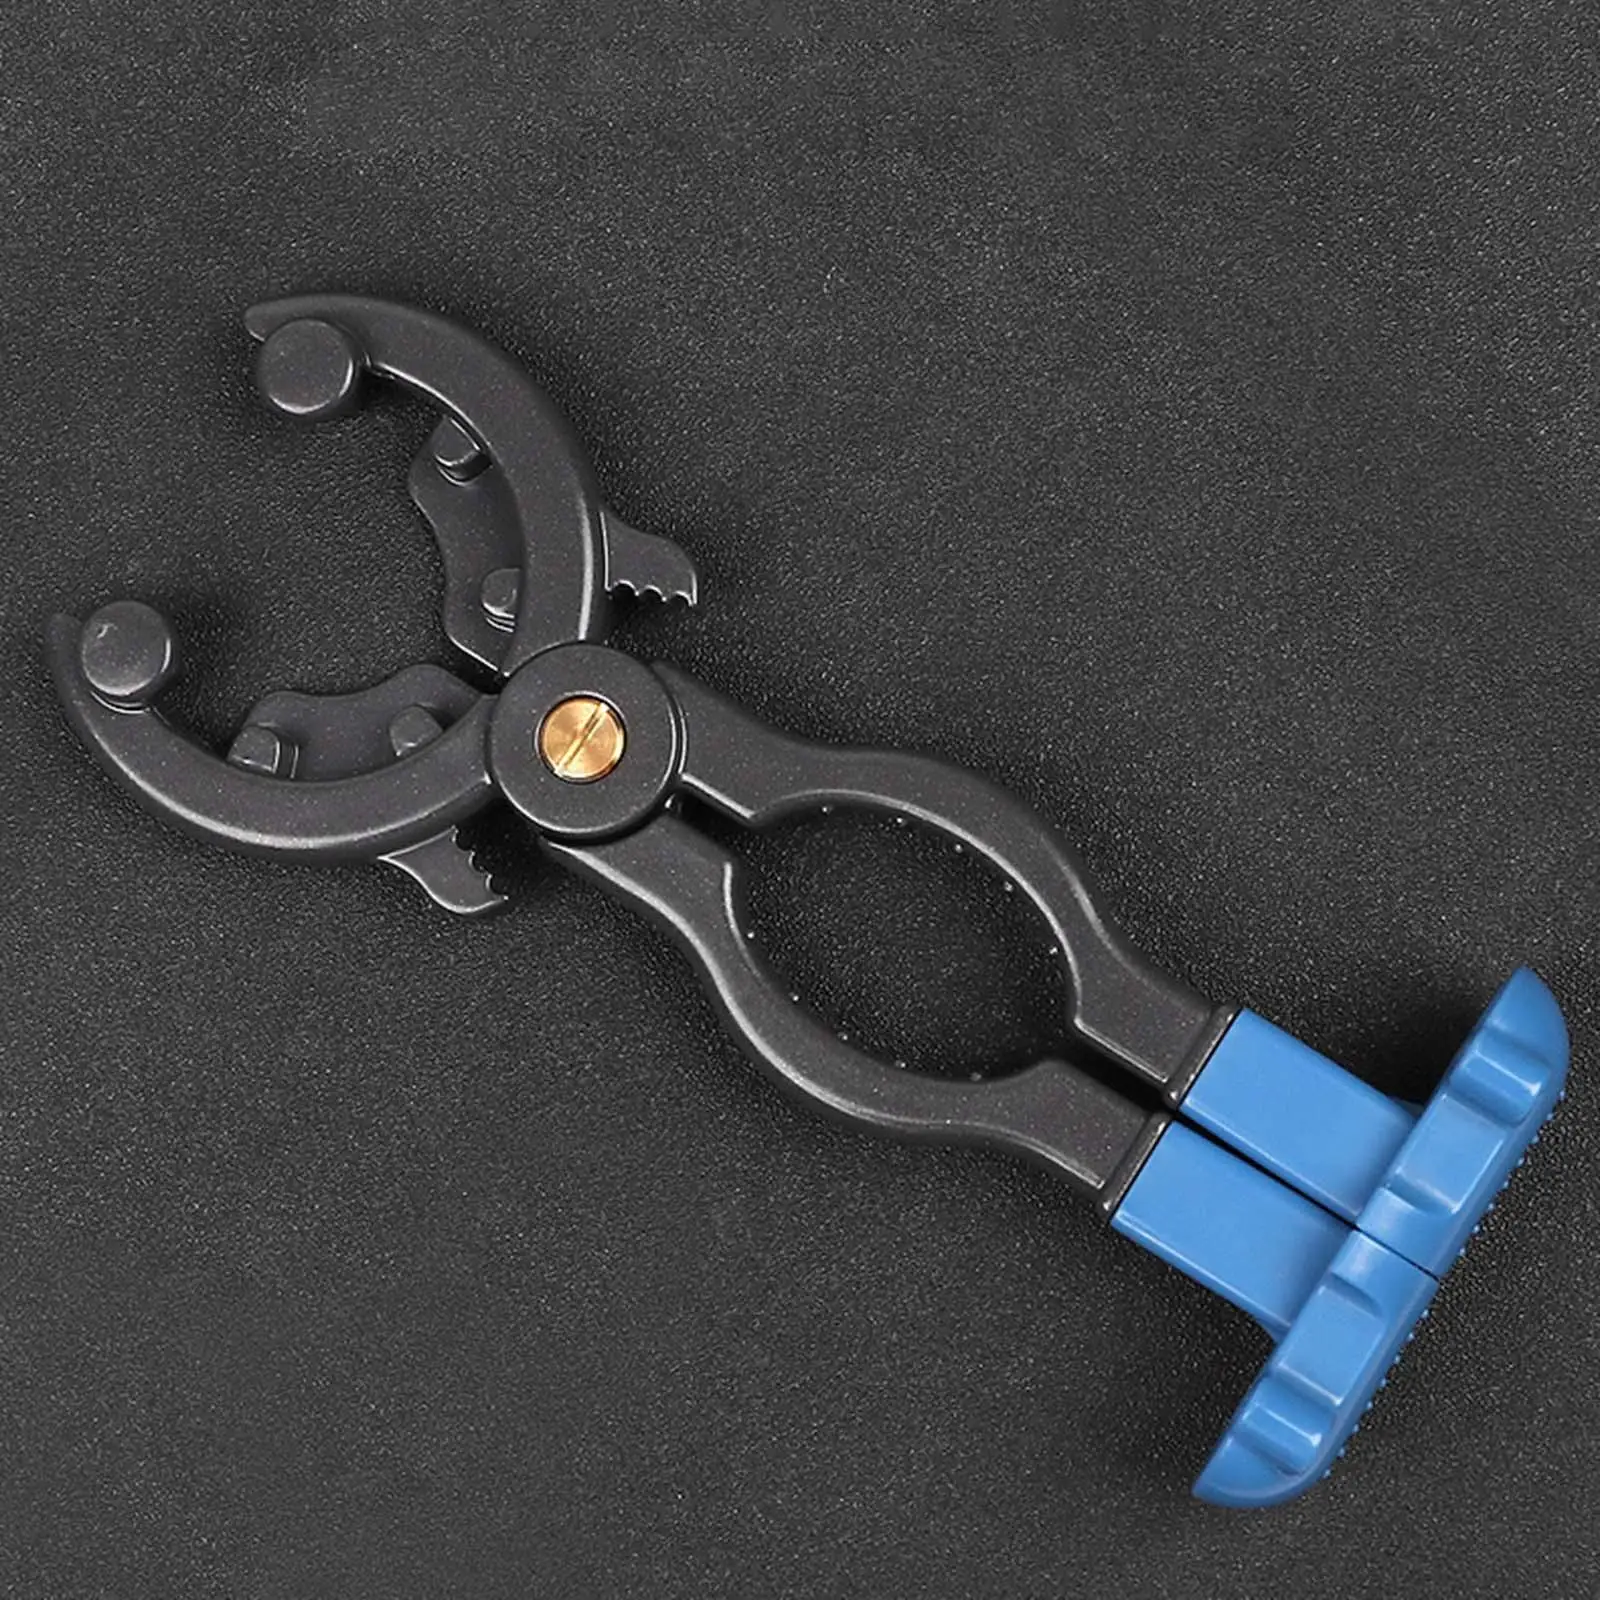 Gas Valve Wrench Can Opener for 24-50mm Pressure Valve Walnut Opener Liquefied Gas Professional Hand Tools